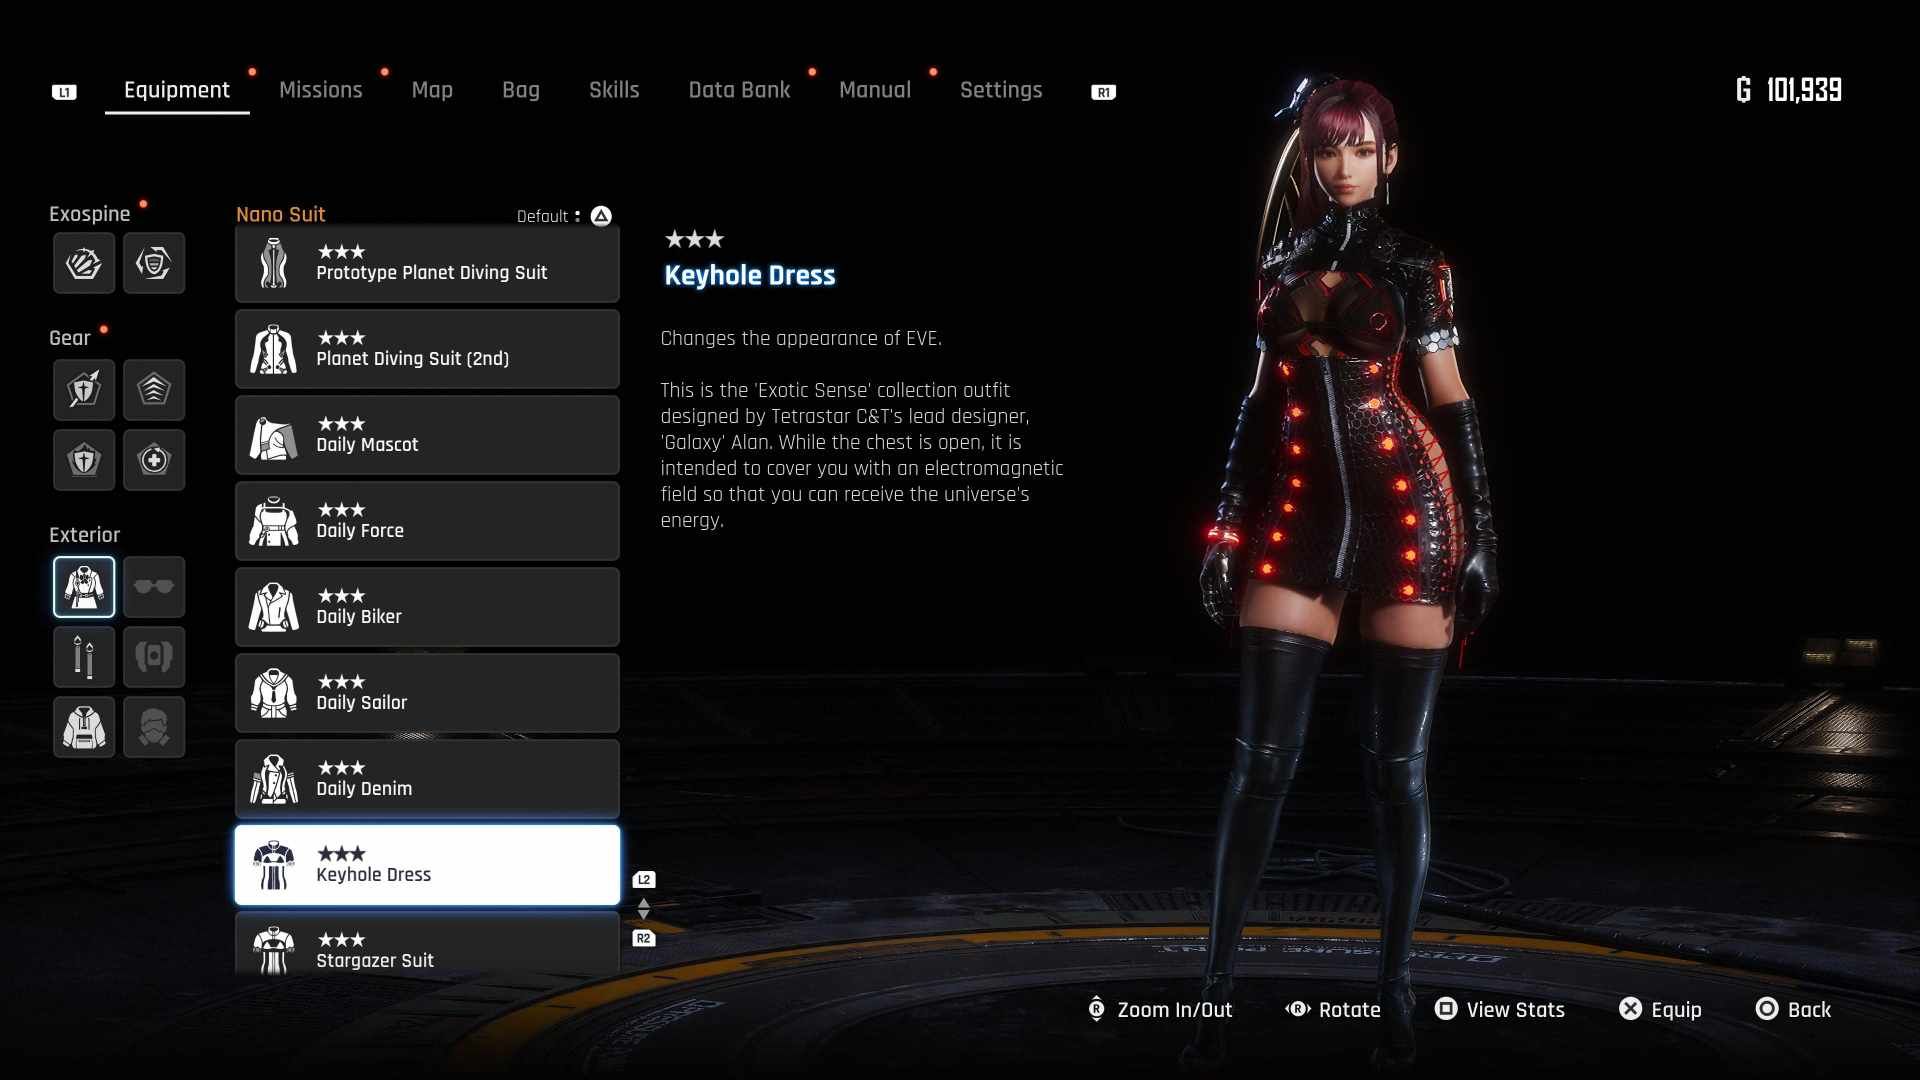 The Keyhole Dress Outfit in Stellar Blade